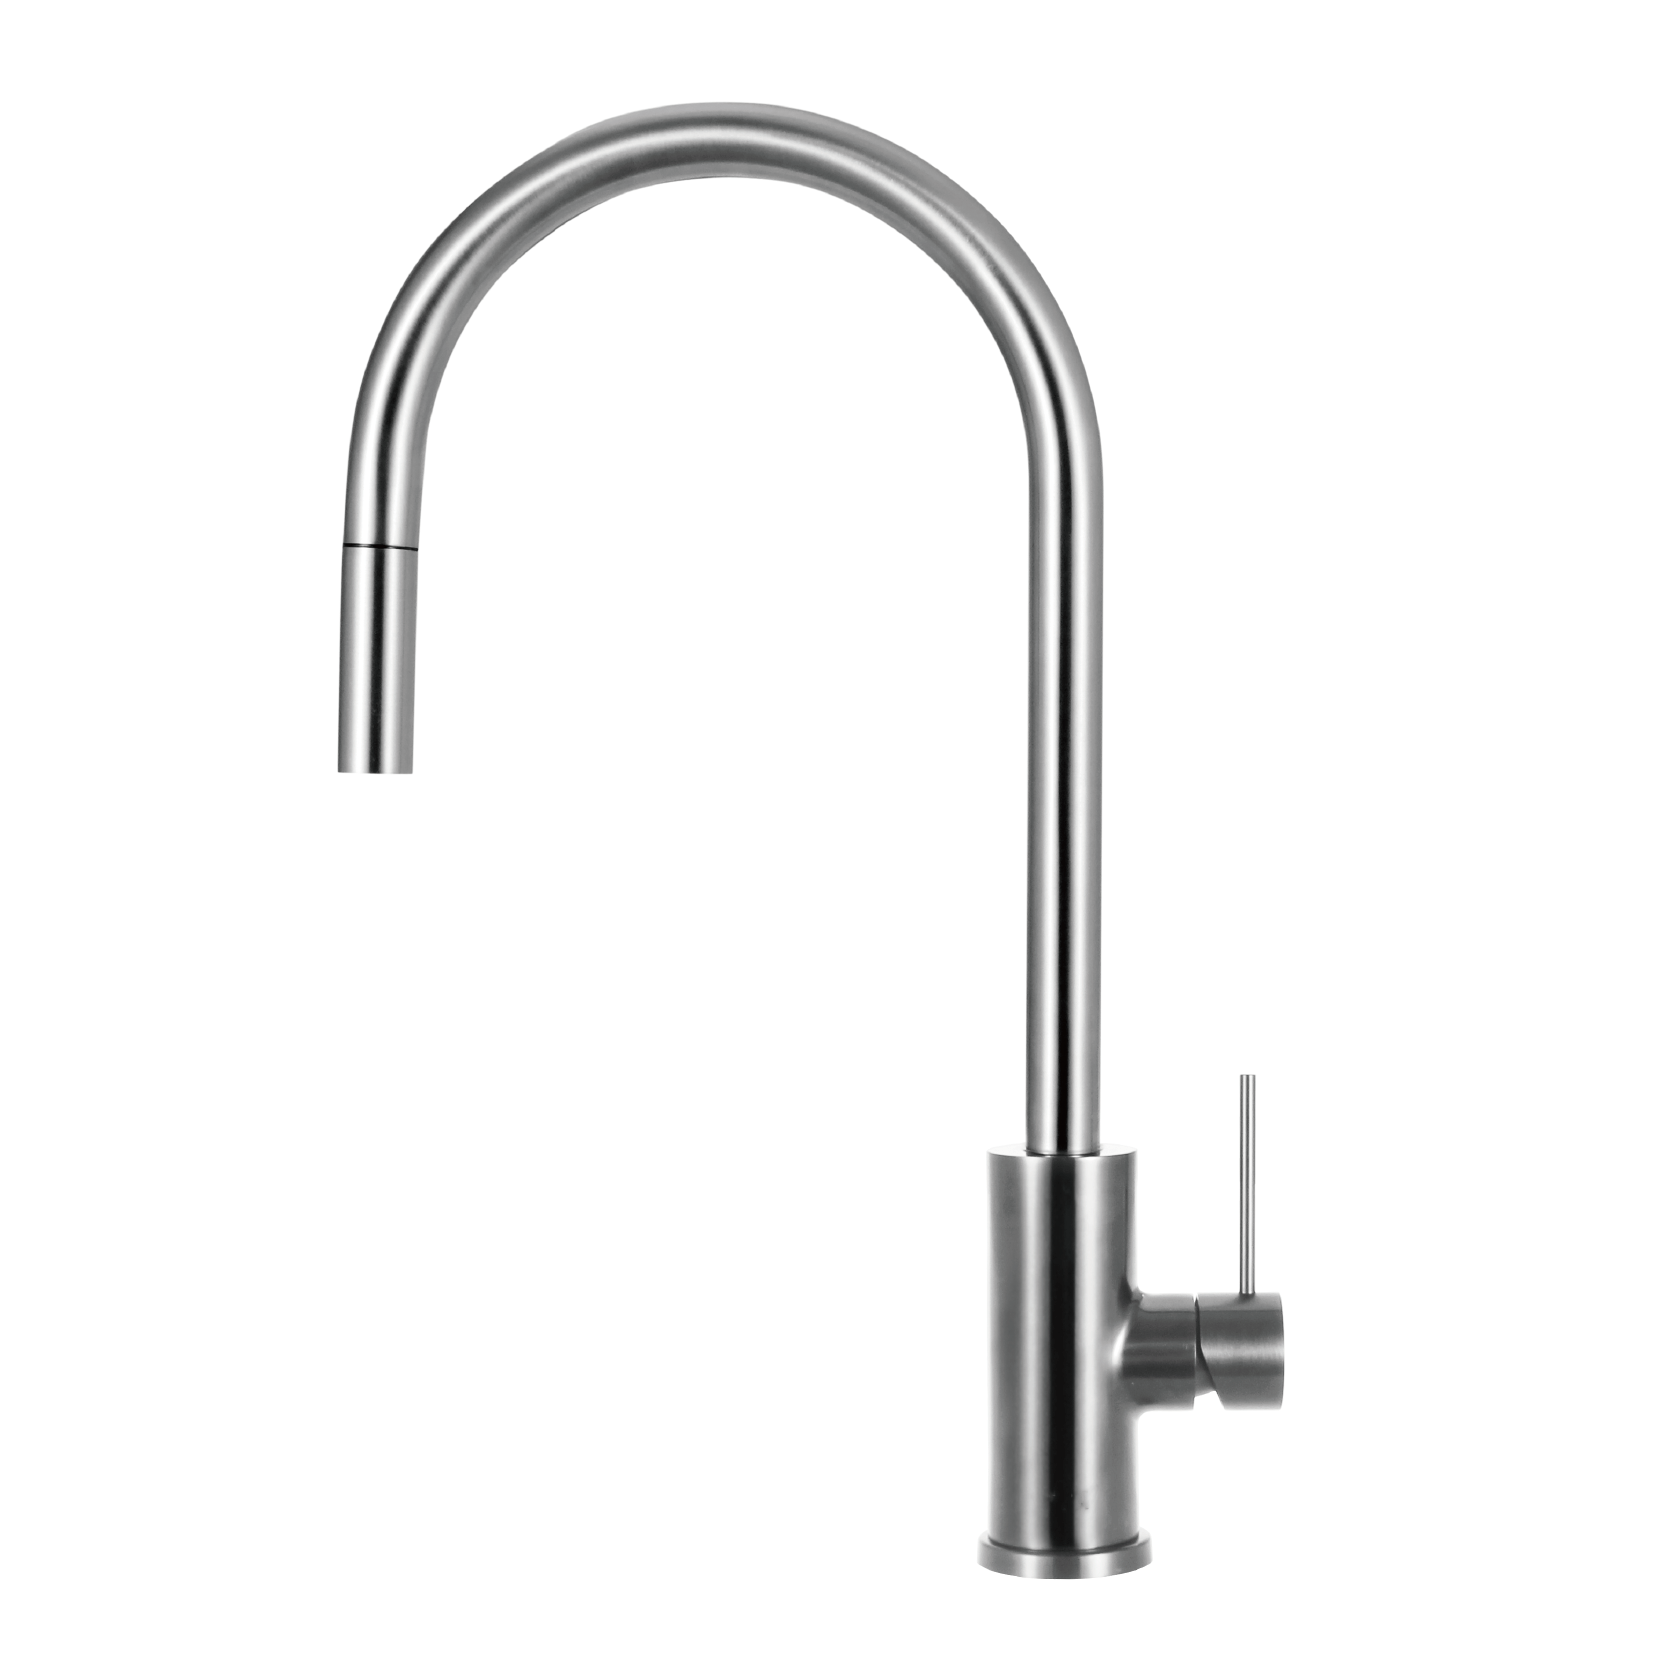 Bexley Ultra Slim Pull Out Kitchen Mixer Brushed Nickel